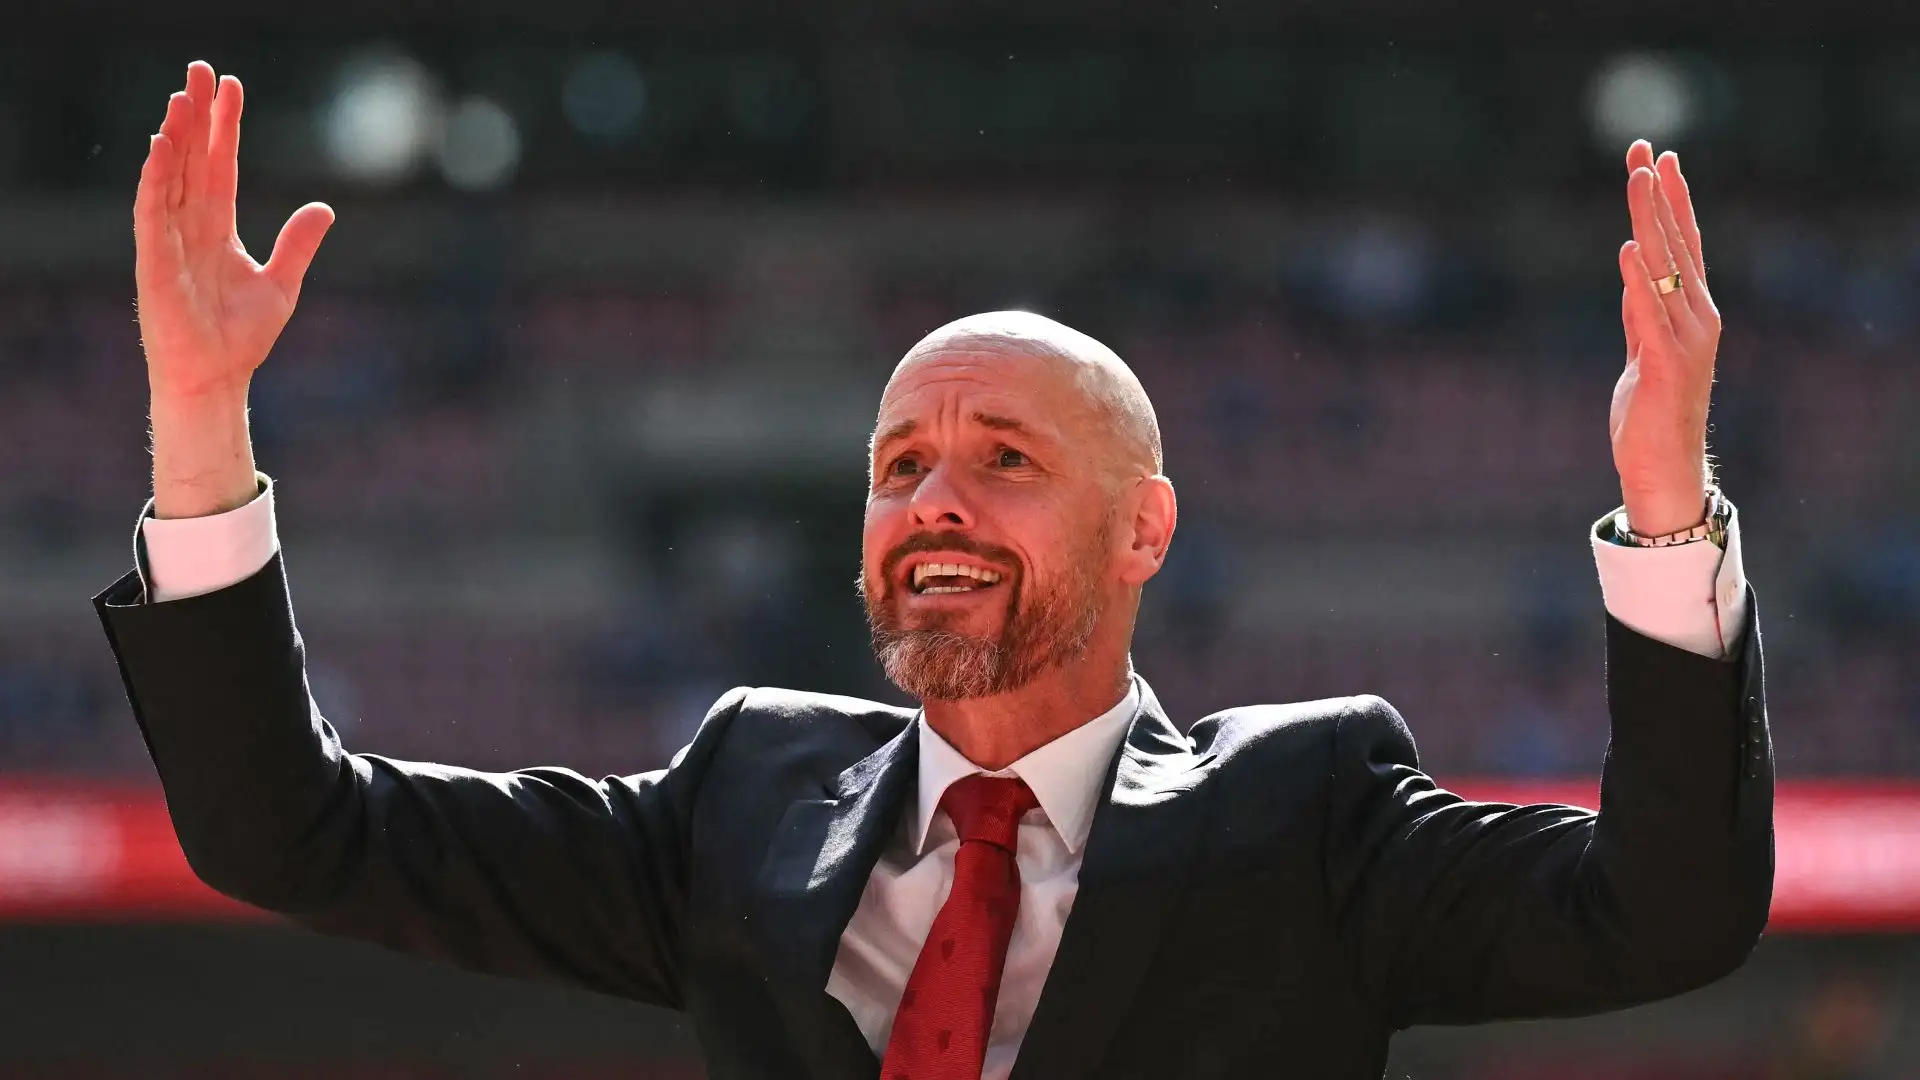 Revealed: Erik ten Hag’s three demands before he agrees to sign new Man Utd contract – including key decision on Jadon Sancho’s future